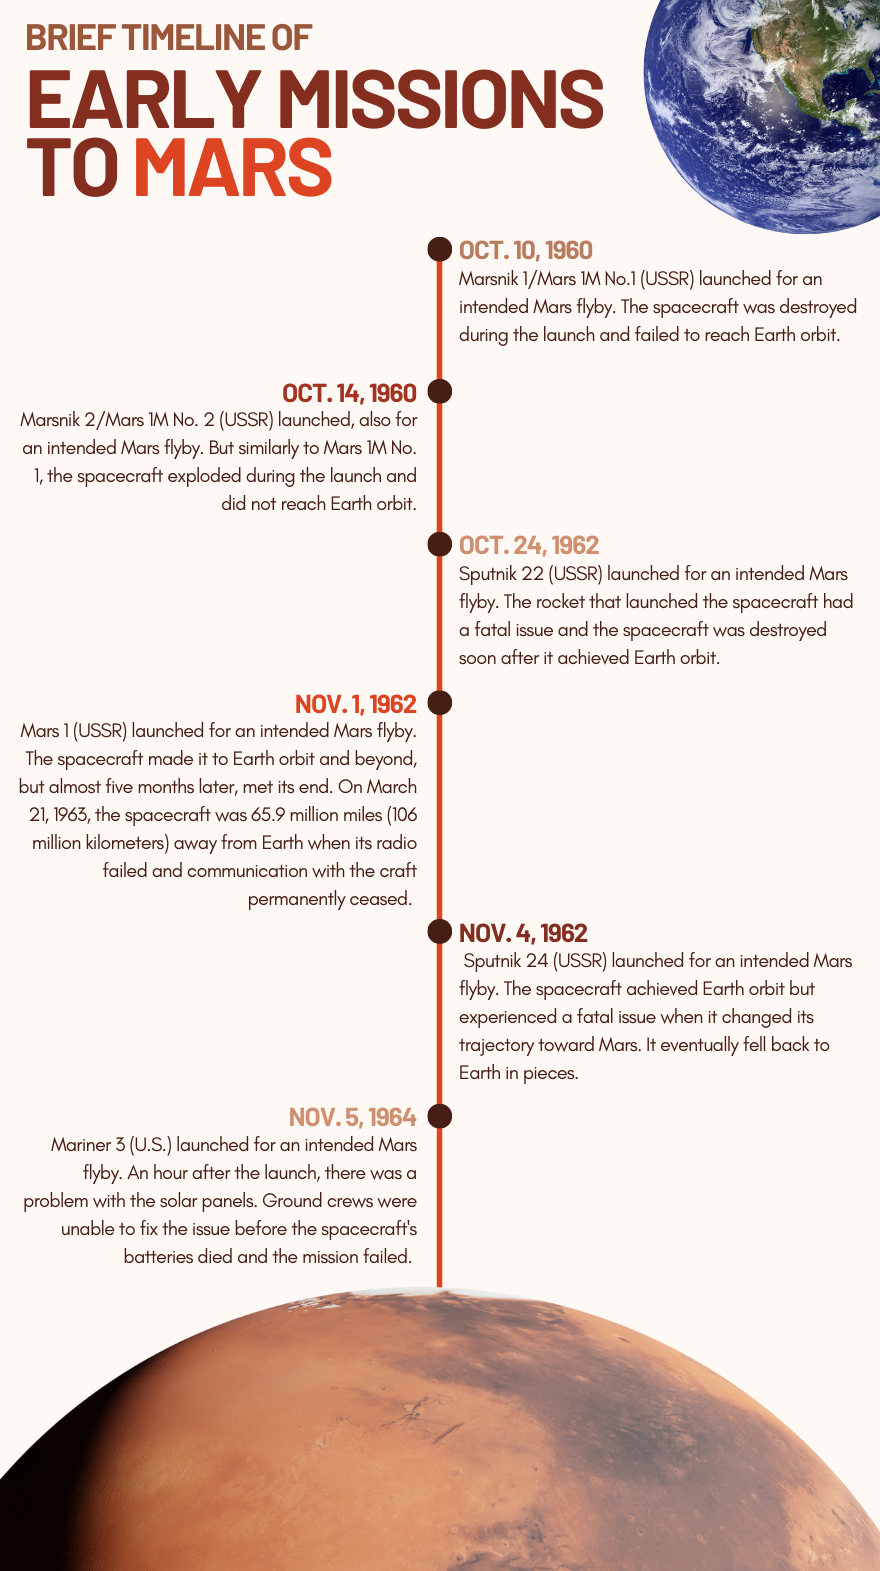 A brief timeline of early Mars missions.